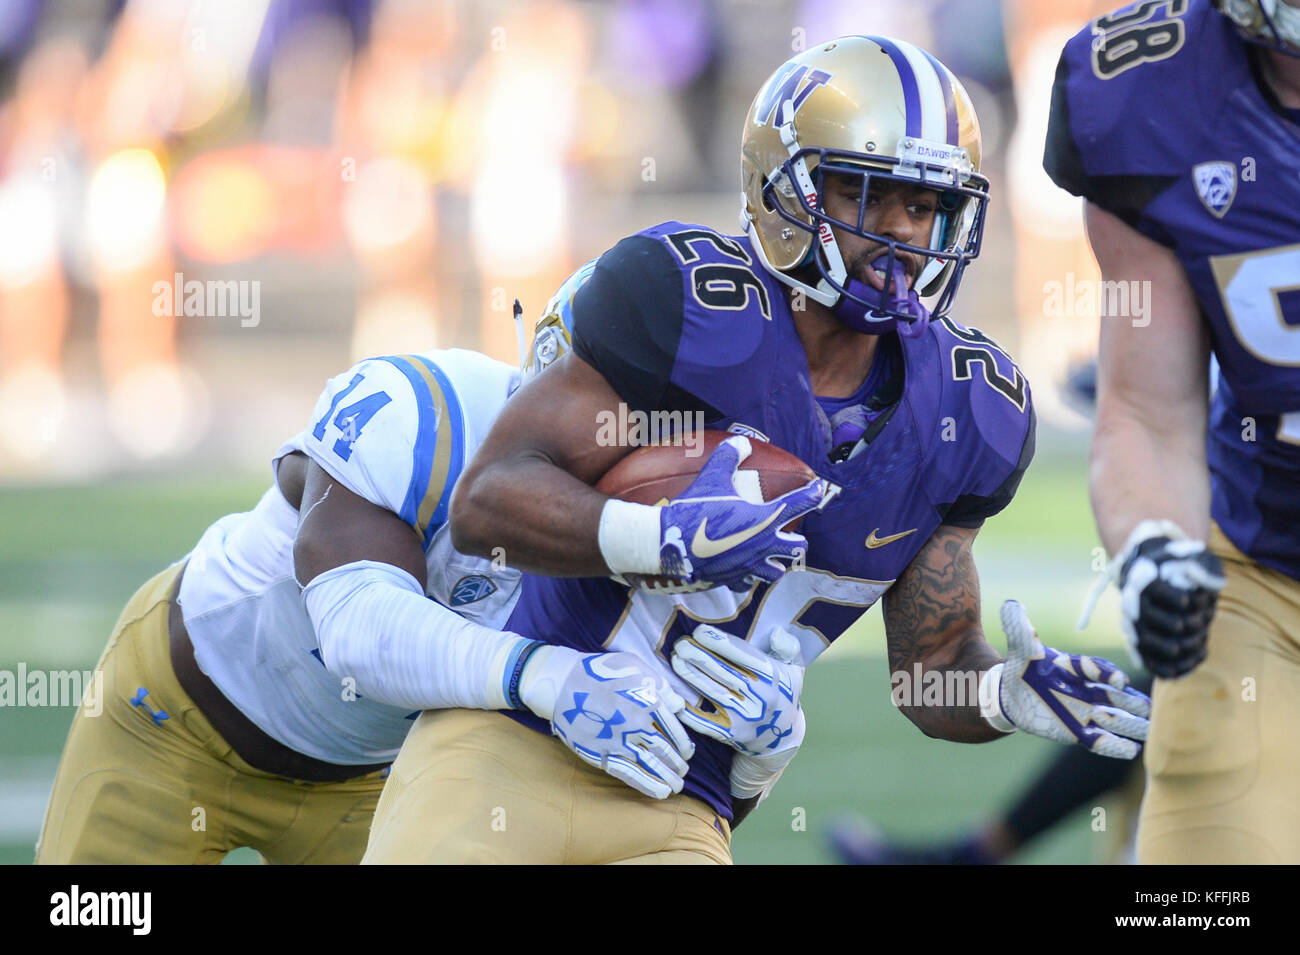 Seattle, WA, USA. 28th Oct, 2017. UW running back Salvon Ahmed (26) is tackled by UCLA's Krys Barnes (14) after a short gain during a PAC12 football game between the UCLA Bruins and the Washington Huskies. The game was played at Husky Stadium on the University of Washington campus in Seattle, WA. Jeff Halstead/CSM/Alamy Live News Stock Photo